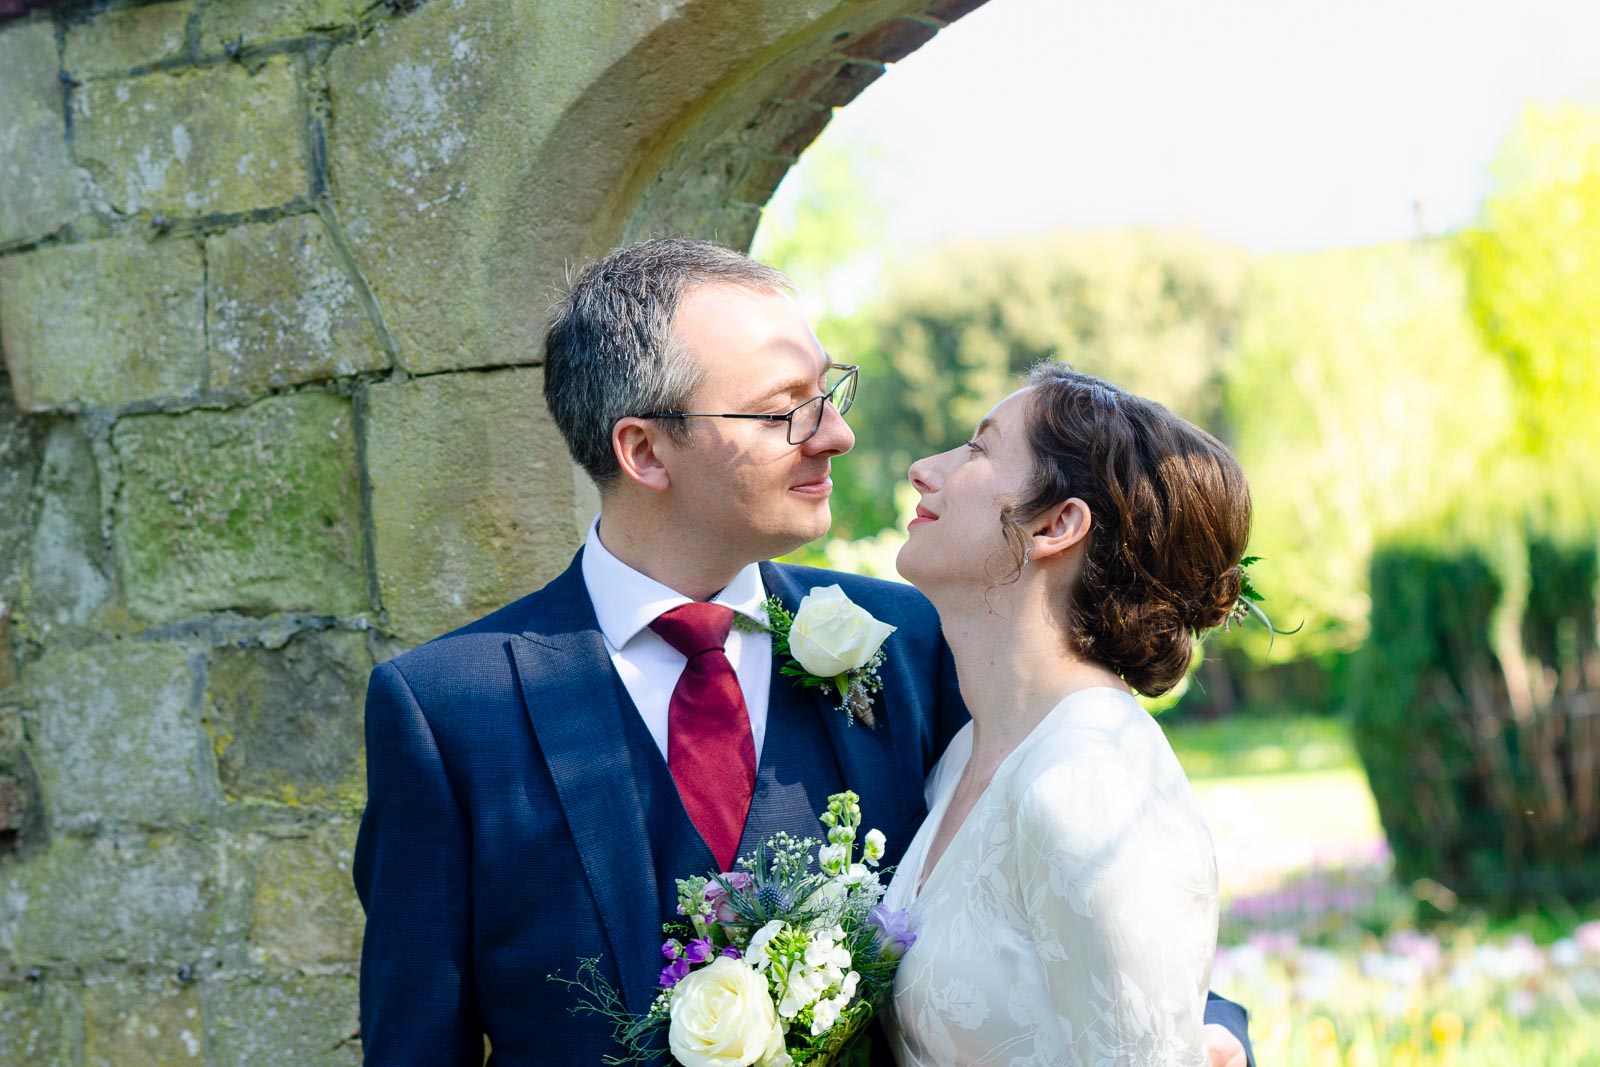 Alexis and Niell smile at eachother on front of one of the arches in Southover Grange after their wedding.